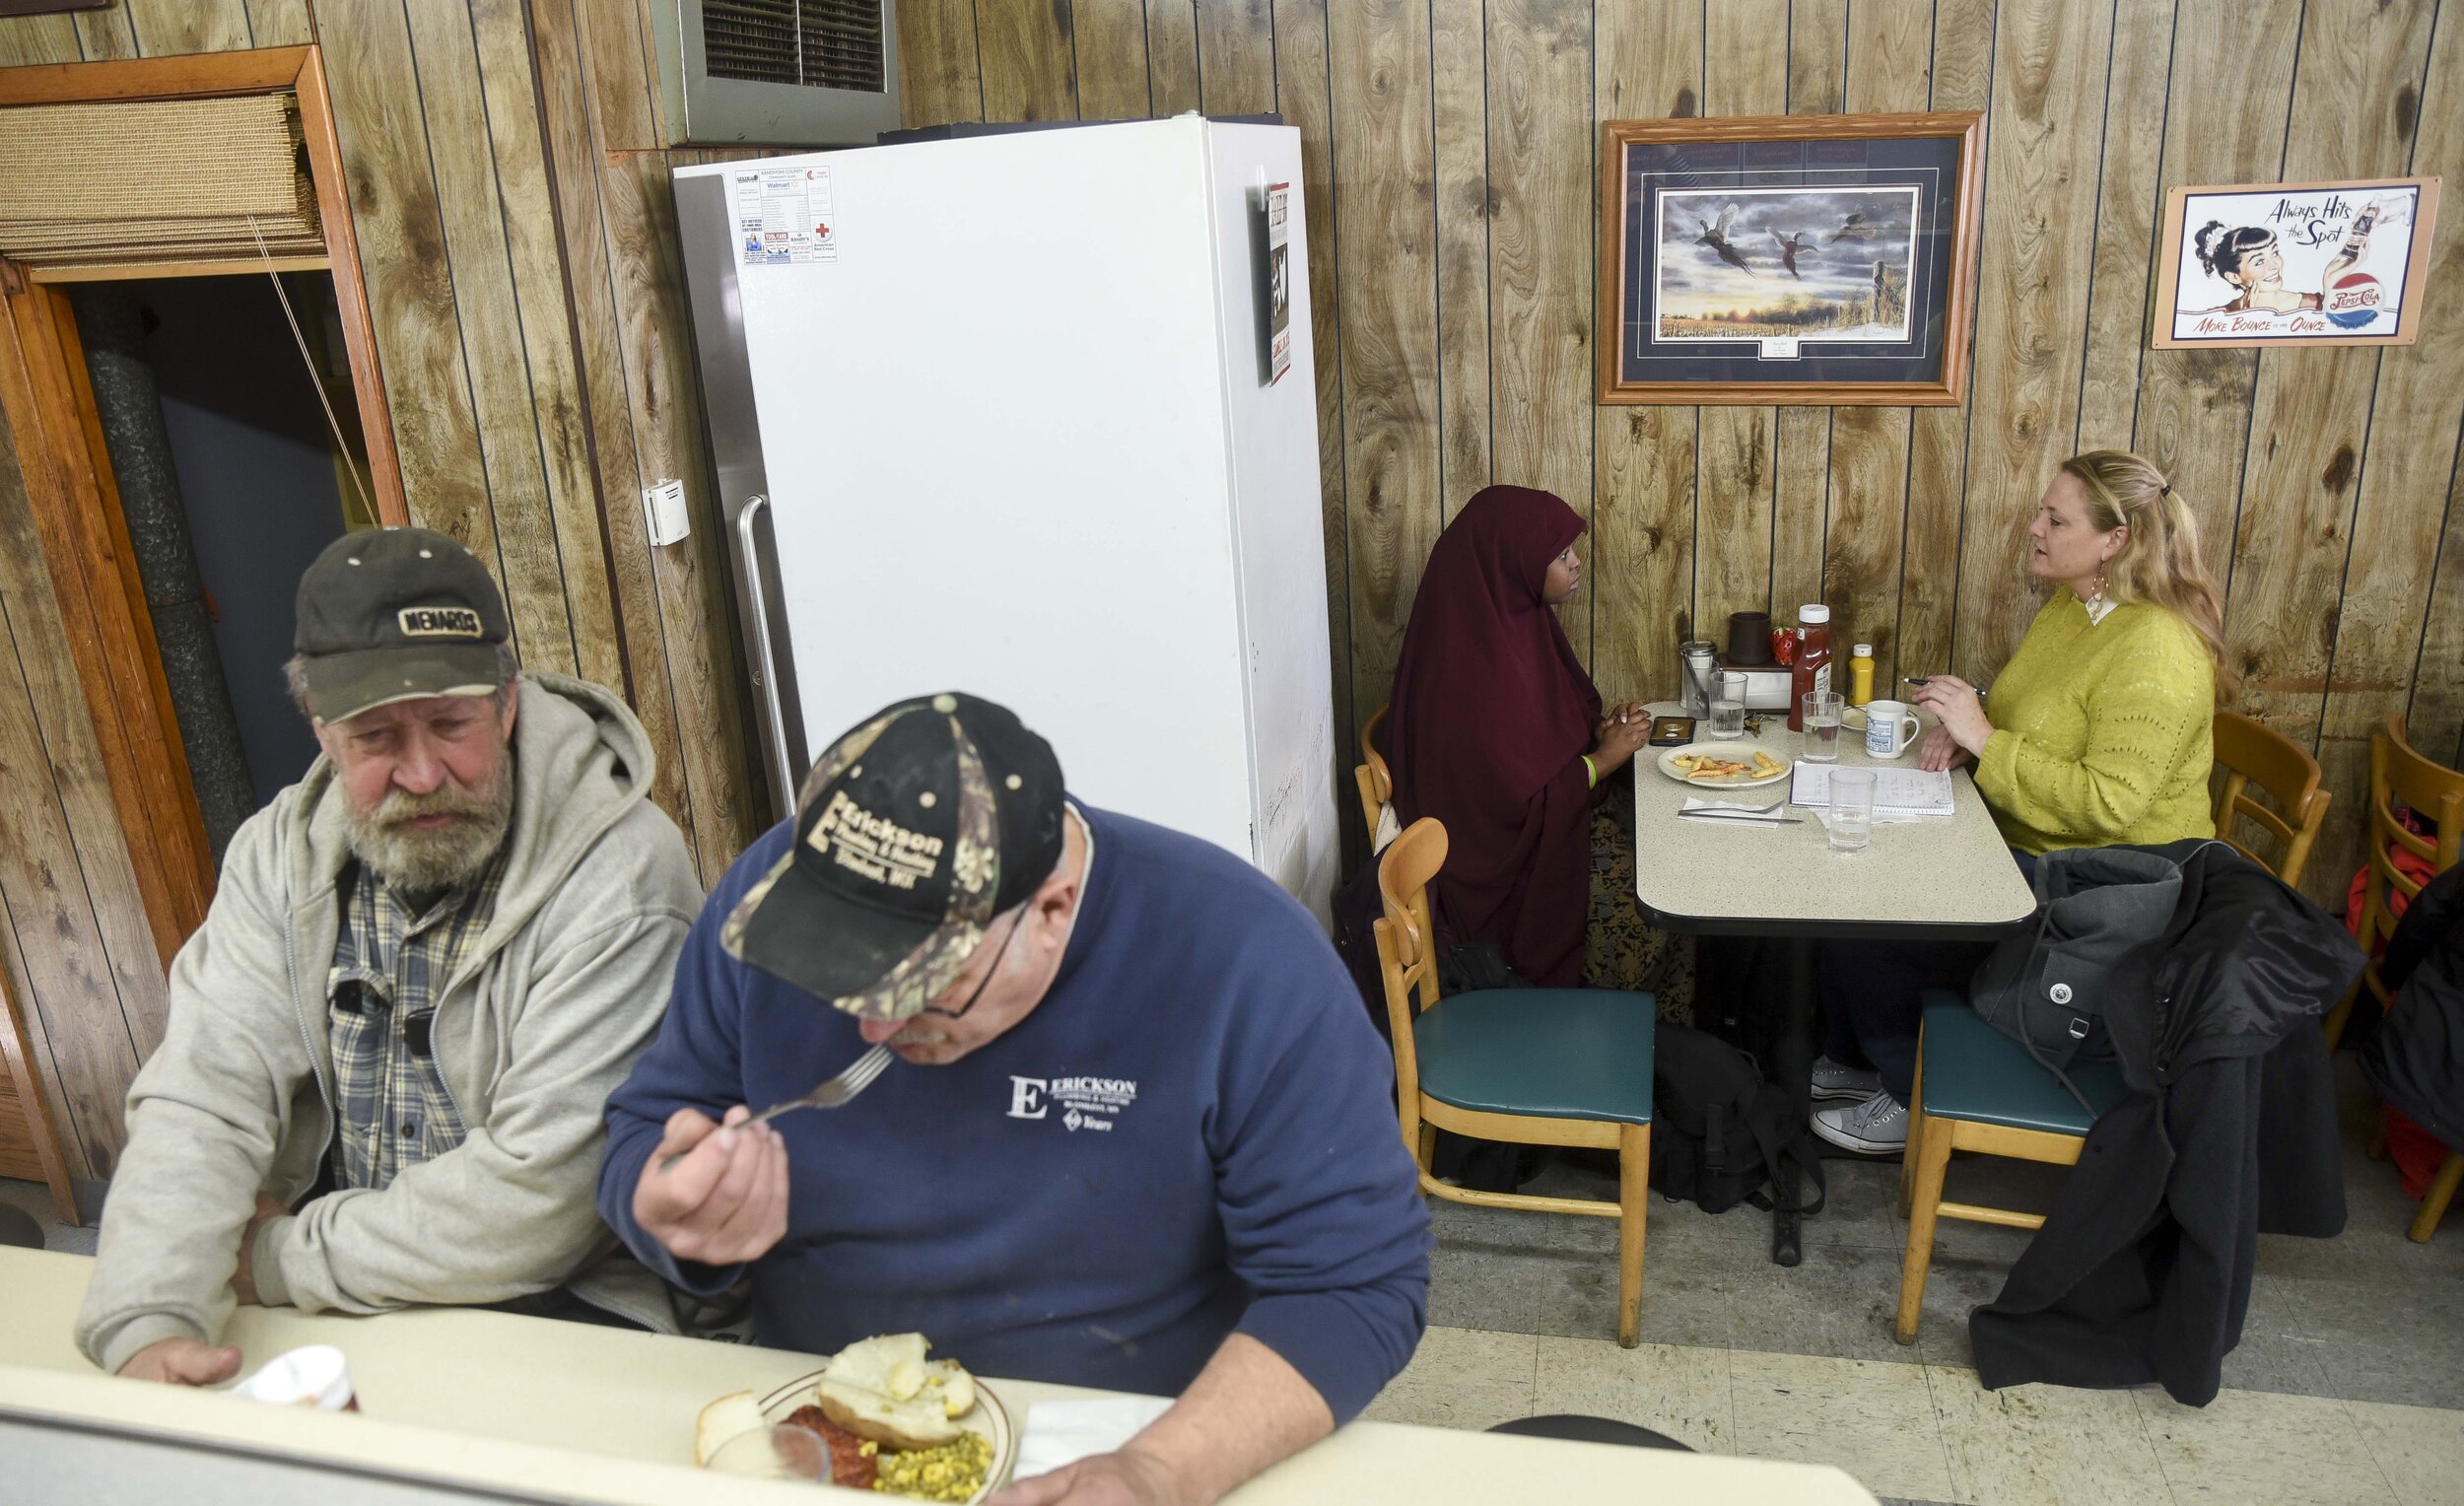  Kosar eats with Jessica Rohloff, a friend and colleague, March 9, 2019 at Frieda’s Cafe, a popular spot for railroad workers and longtime Willmar residents. Jessica and Hamdi work to heal tensions between Somali refugees and other Willmar area resid